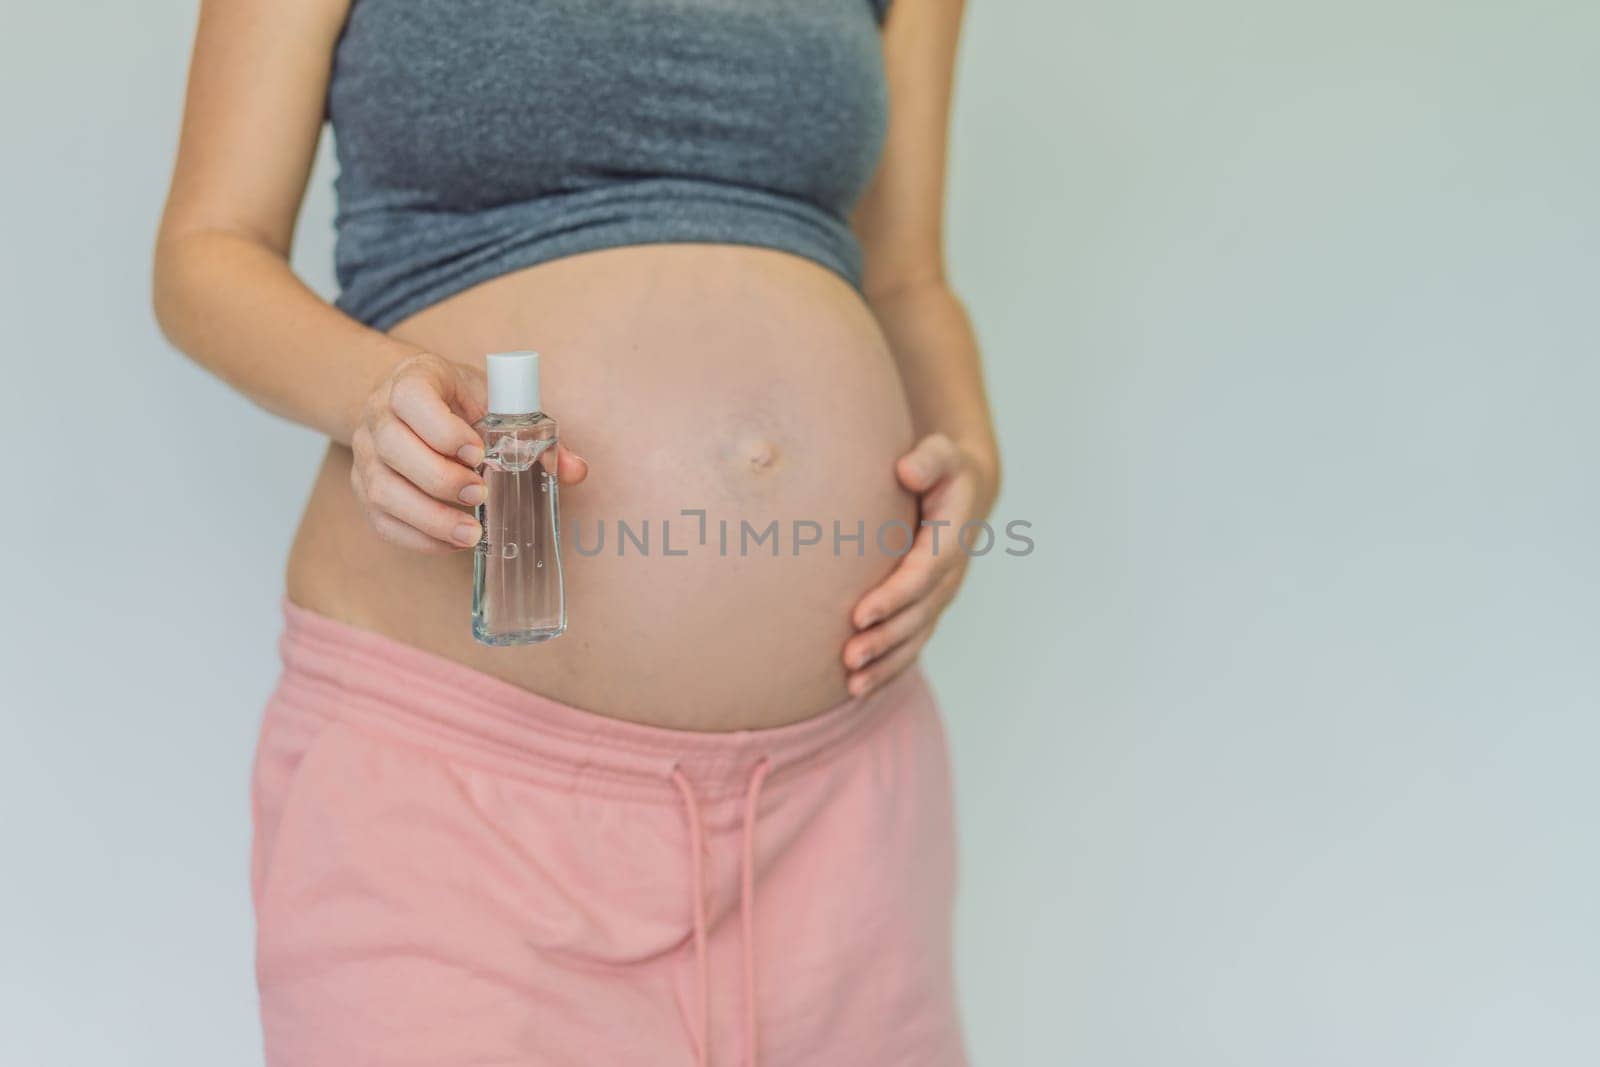 Expectant mom ensures safety, applying gel sanitizer for a clean and healthy pregnancy.